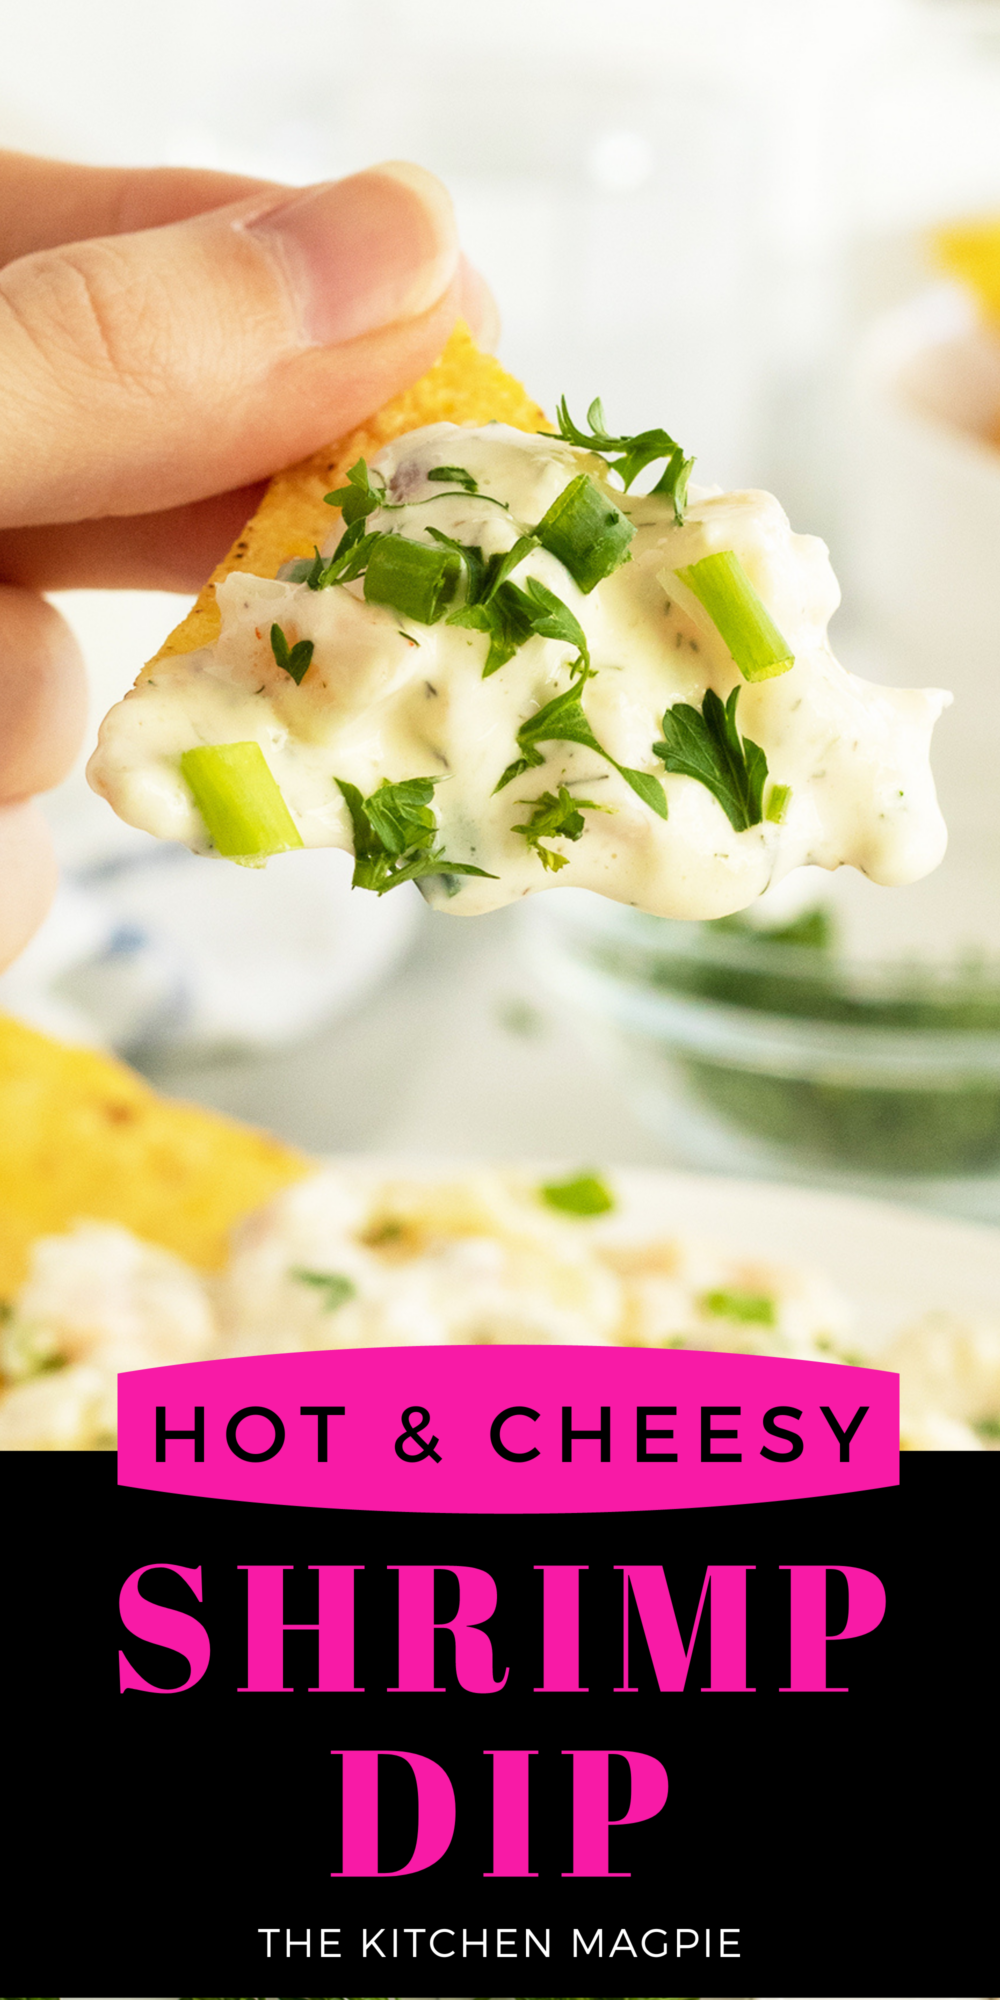 This Shrimp Dip is filled with cheese, mayo, and cream cheese, this is a dip lovers dream, and the shrimp work surprisingly well when all mixed together.